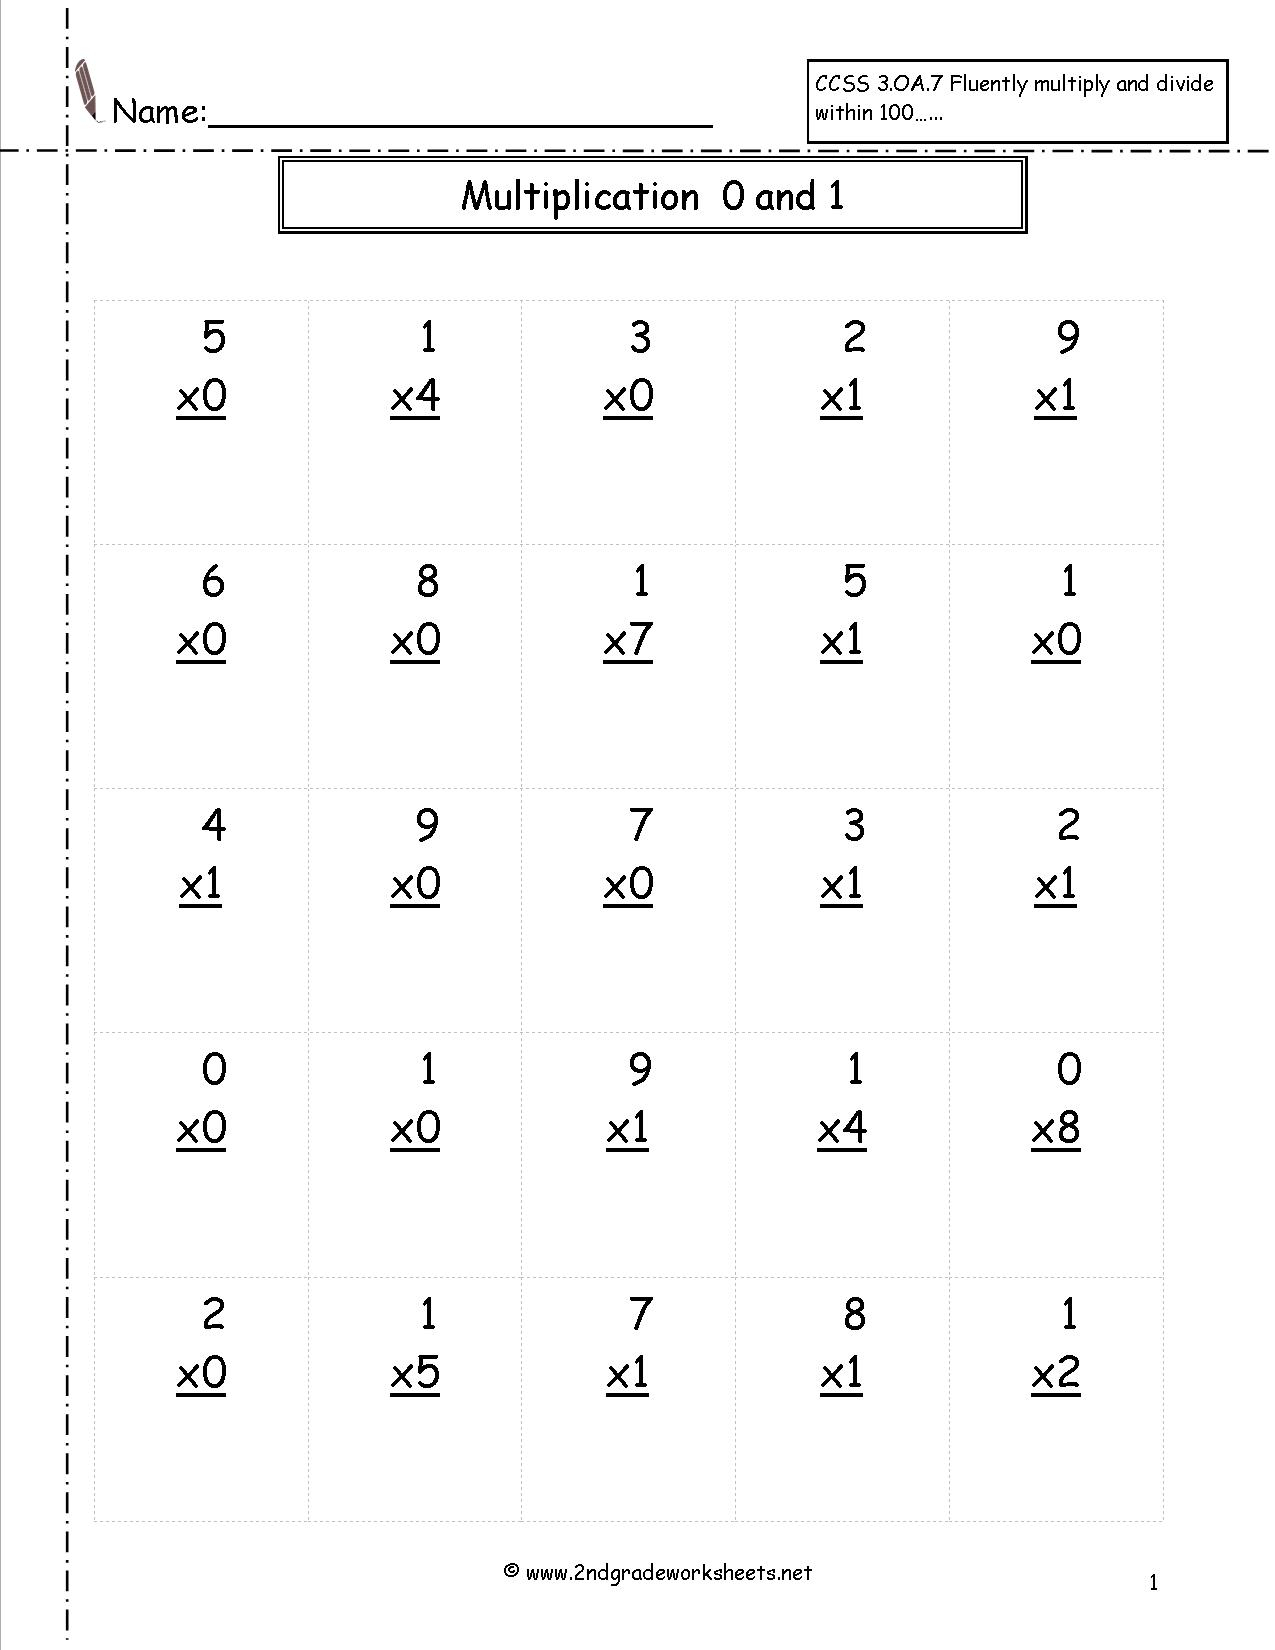 Multiplication Worksheets And Printouts with regard to Printable Multiplication Worksheets 0-5